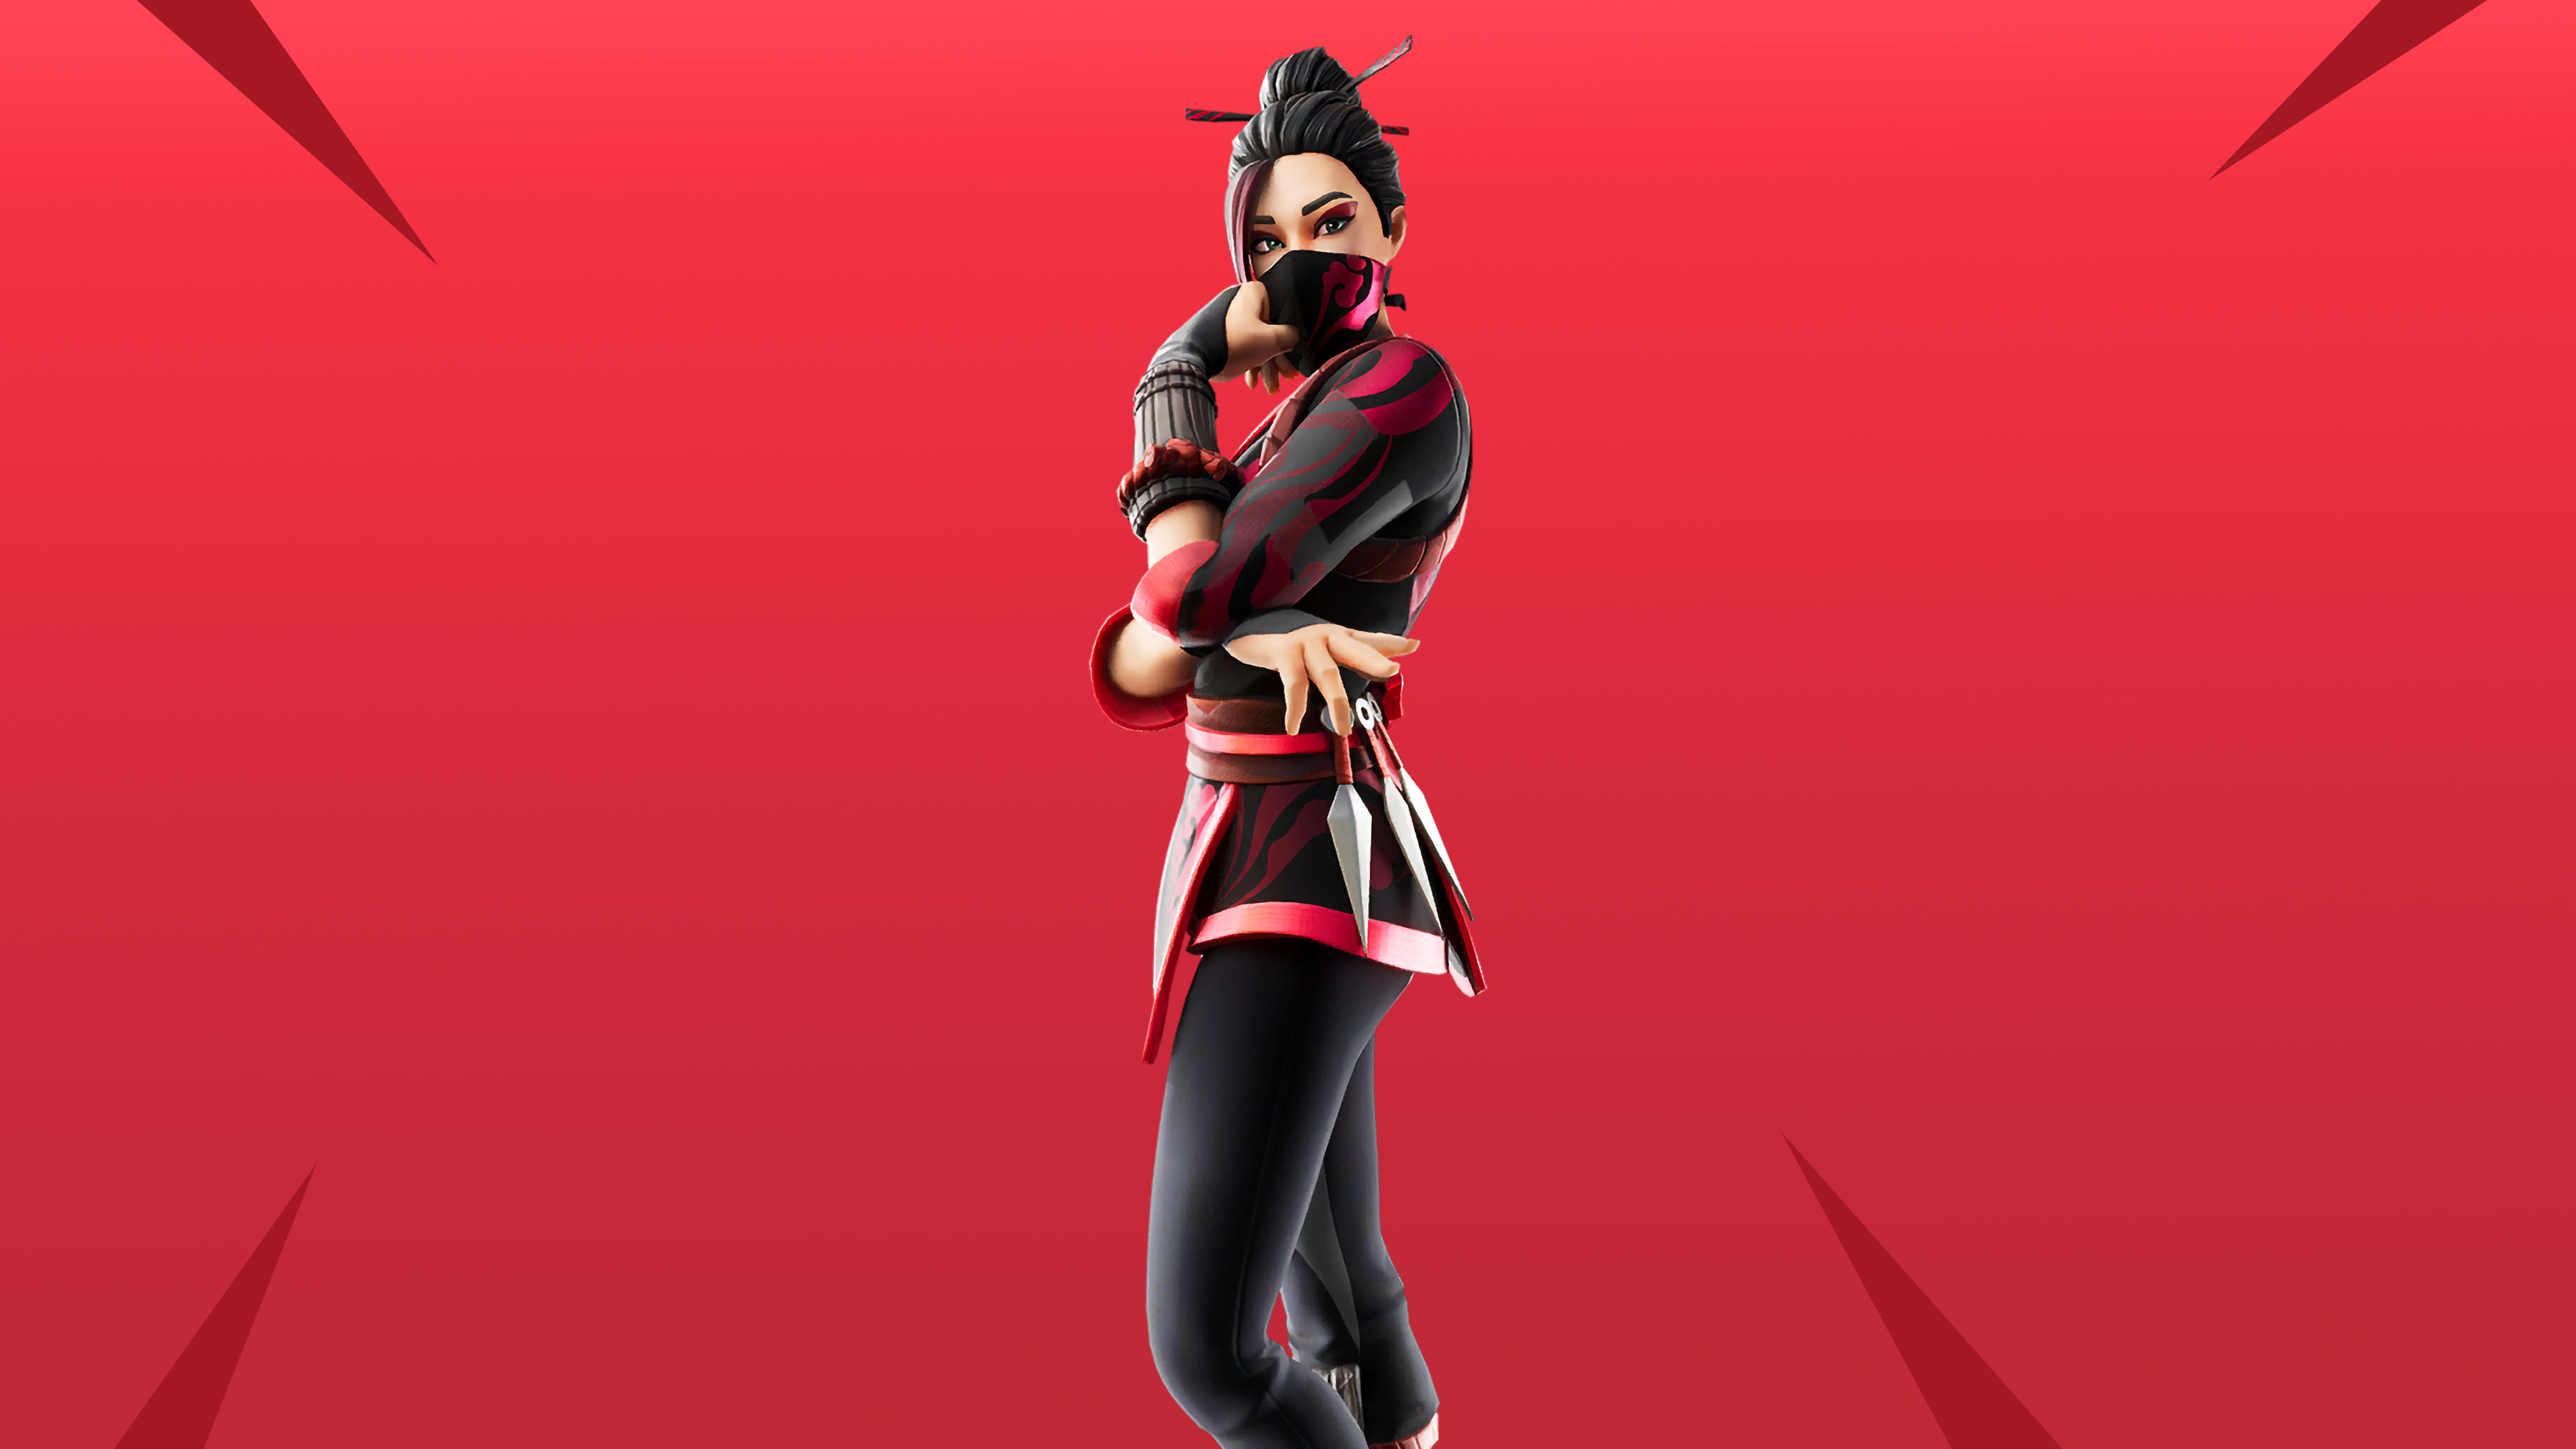 2048x1152 Red Jade Fortnite 4k 2048x1152 Resolution Wallpaper Hd Games 4k Wallpapers Images Photos And Background